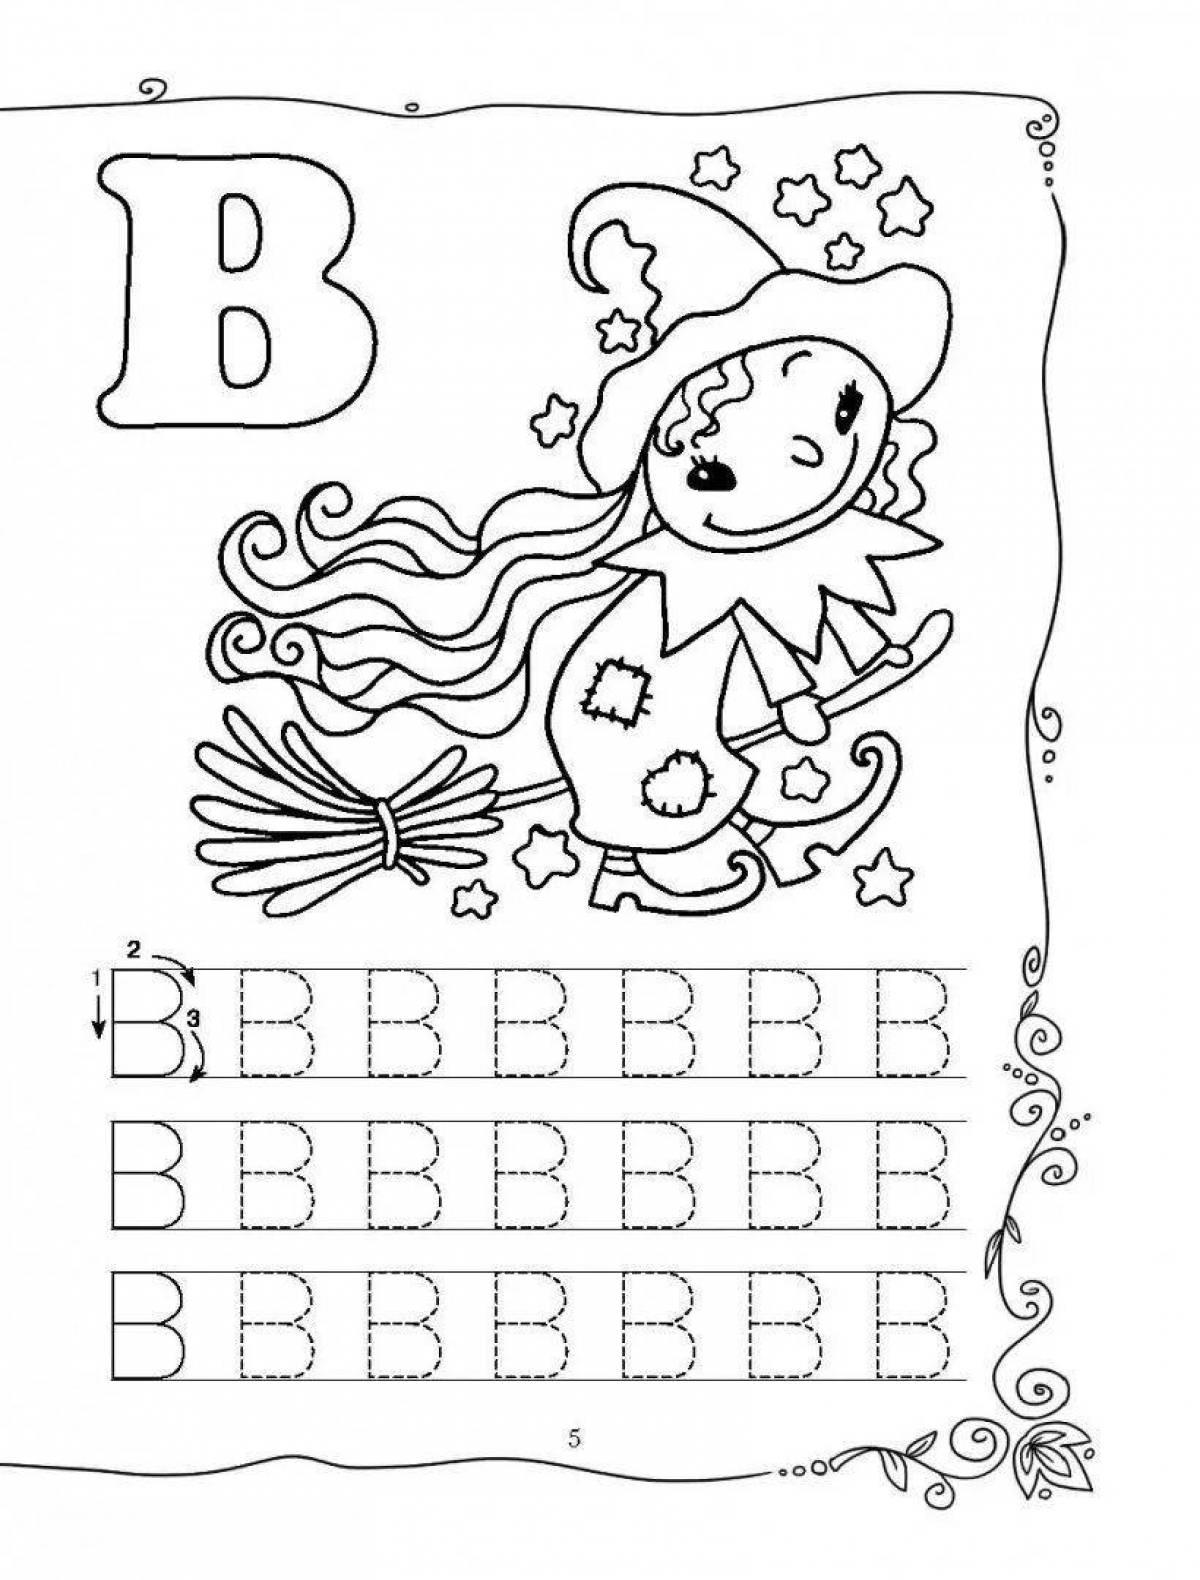 Colorful alphabet coloring page for 5 year olds